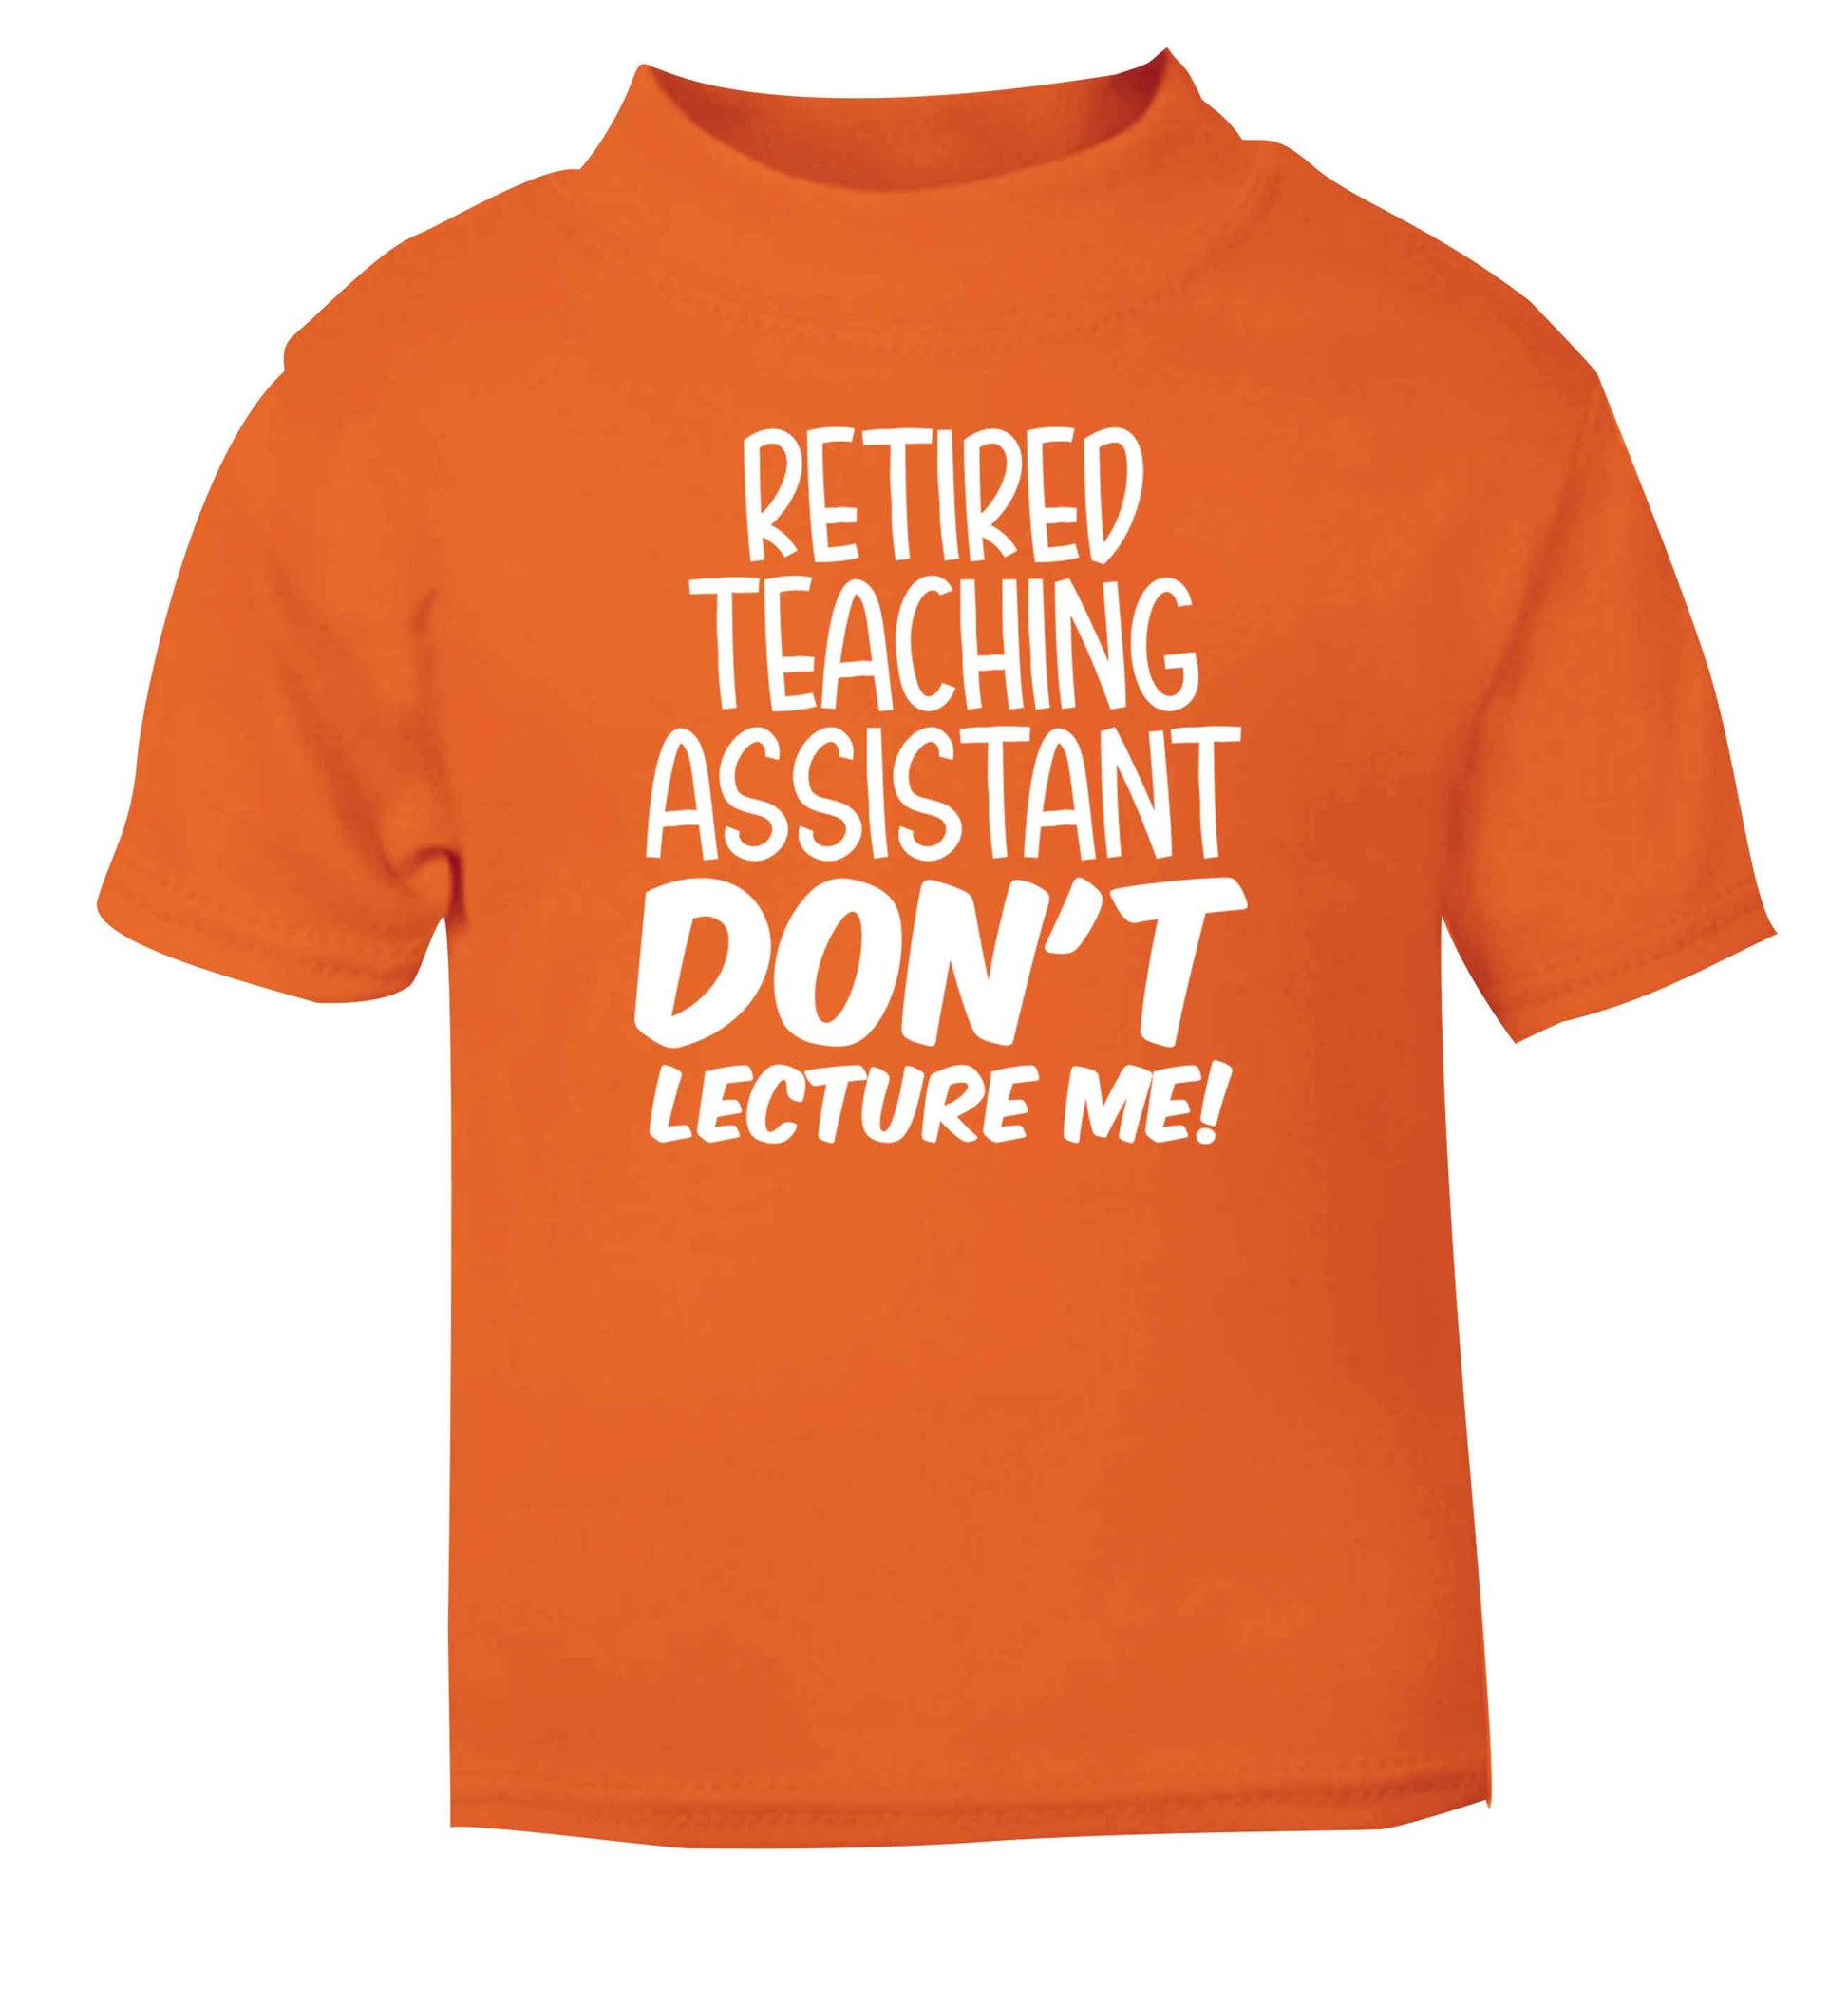 Retired teaching assistant don't lecture me orange Baby Toddler Tshirt 2 Years